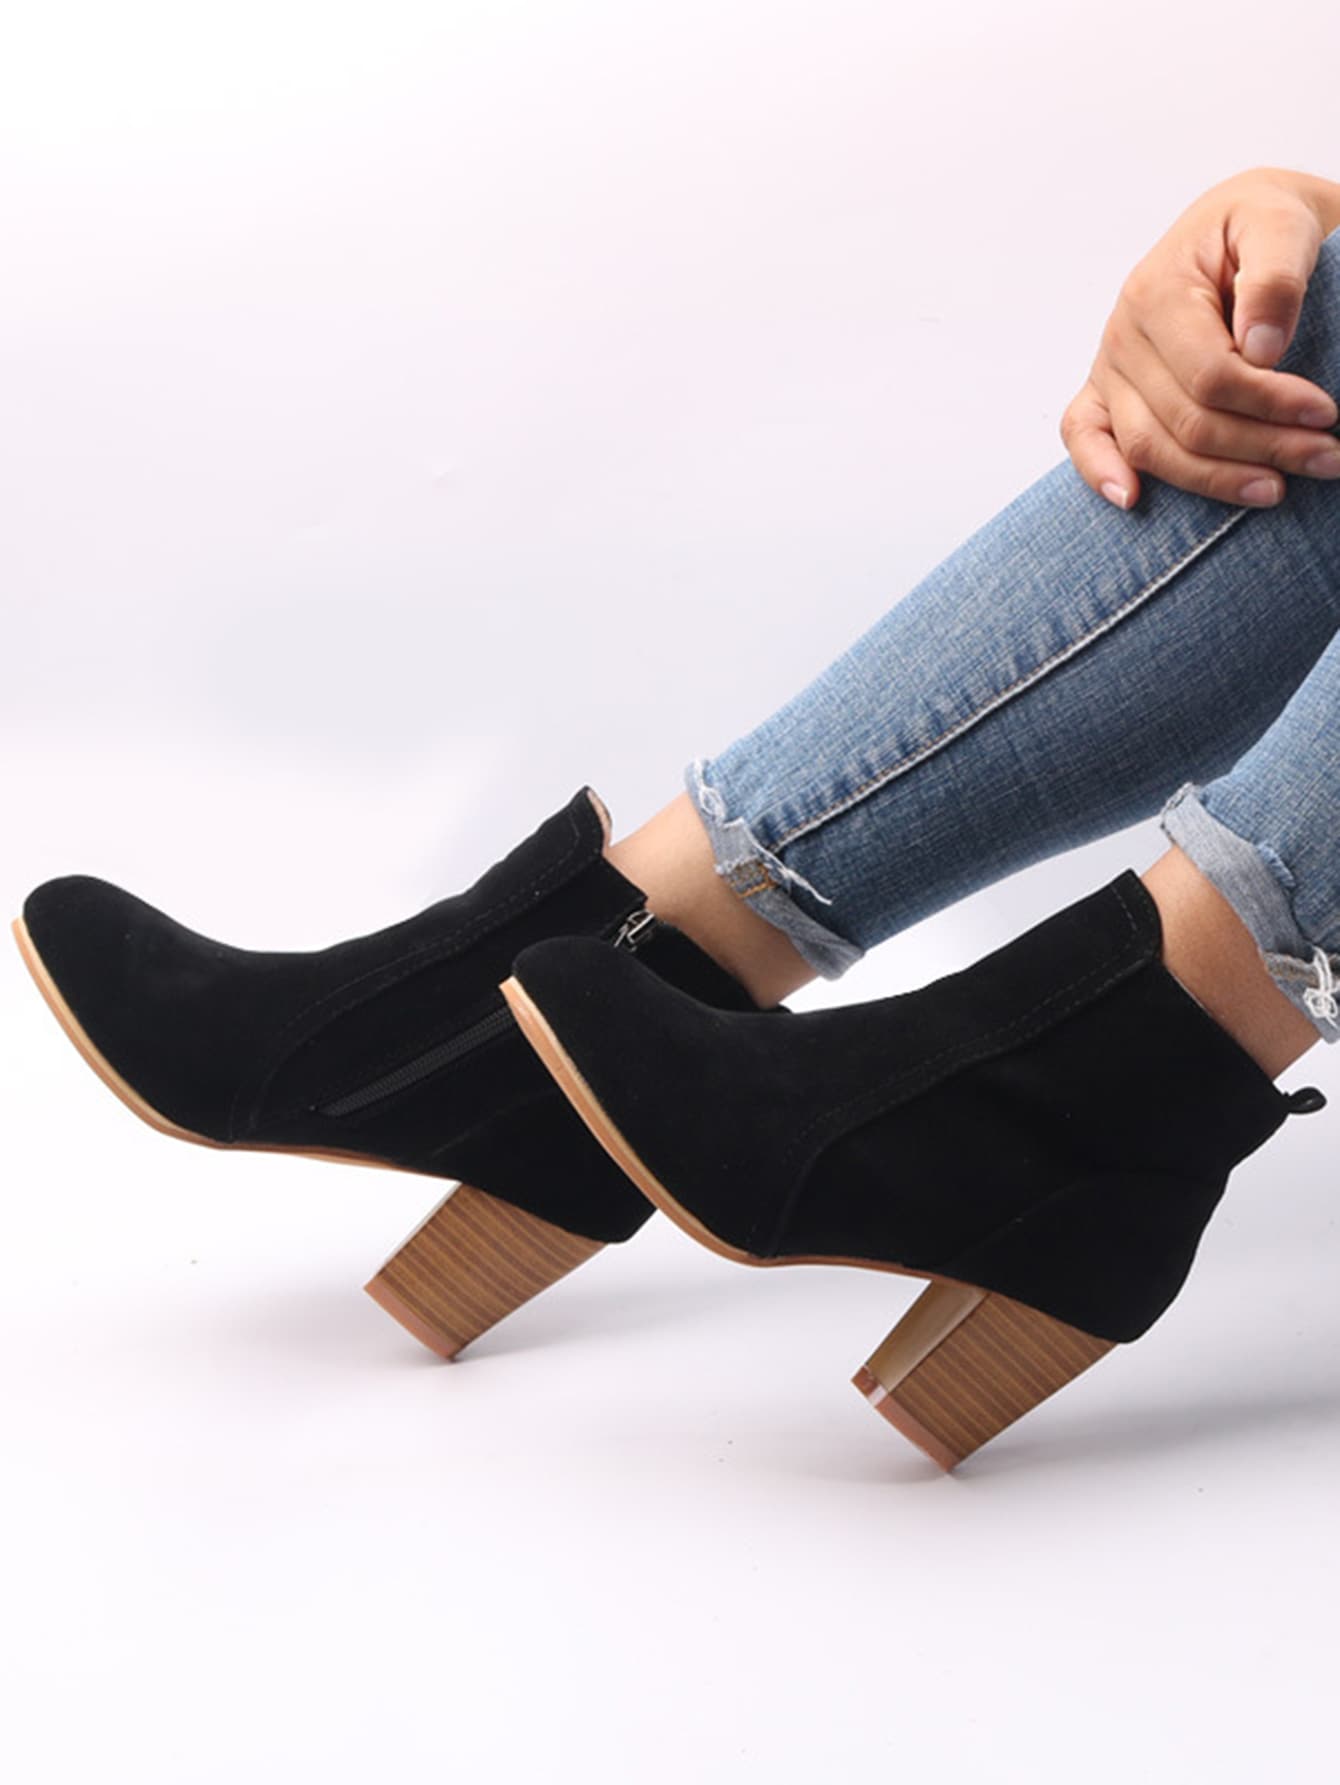 Women Faux Suede Zip Side Boots, Round Toe Chunky Heeled Classic Boots - Sellinashop